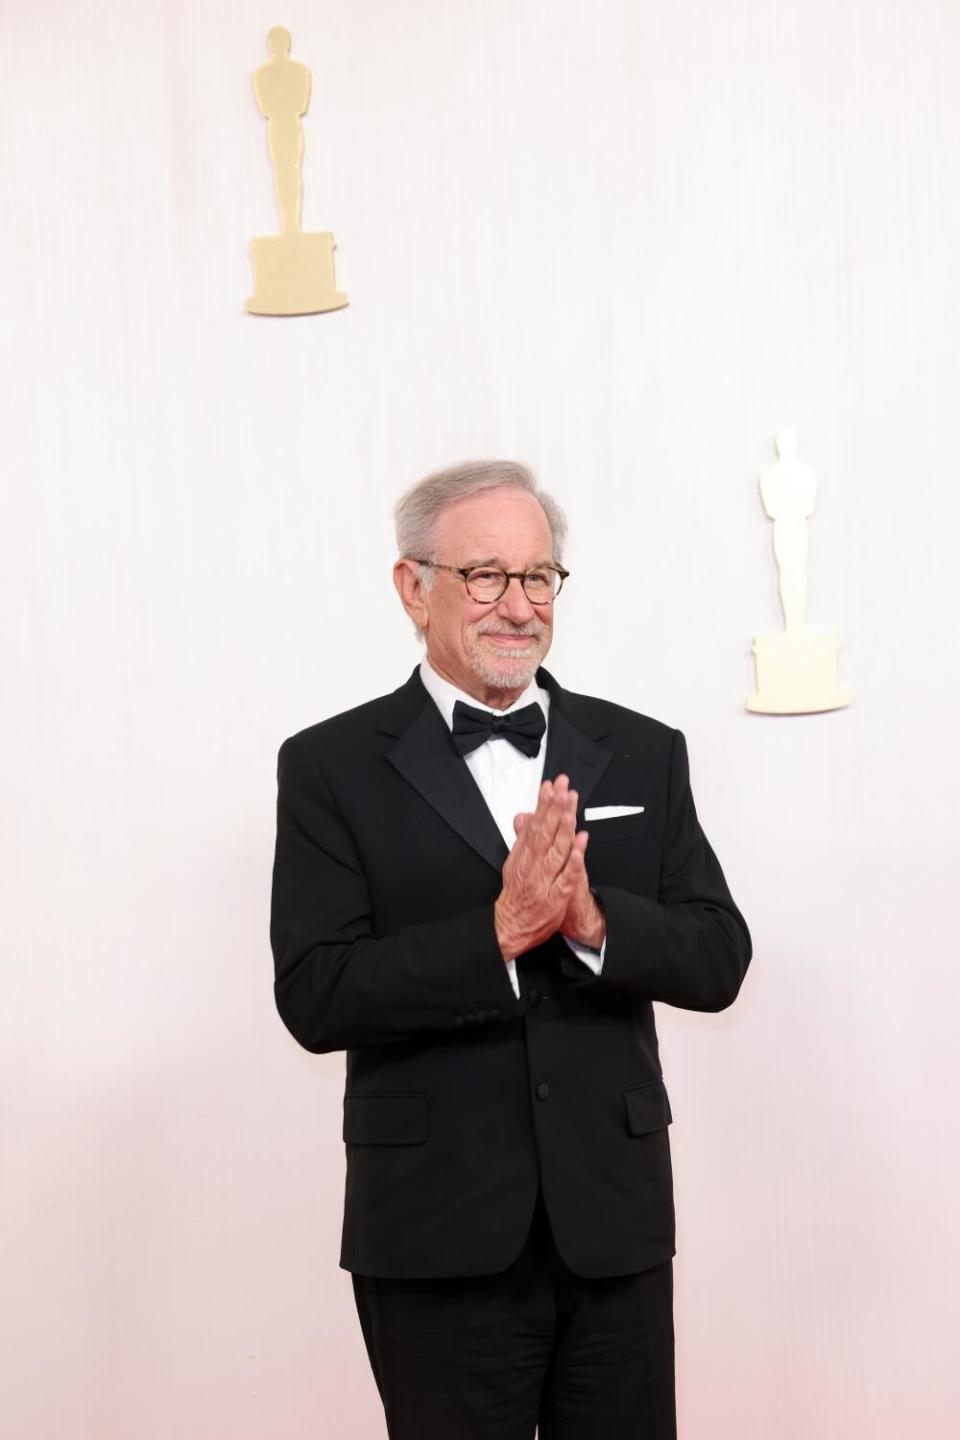 Steven Spielberg in a tuxedo, clasping his hands in prayer position